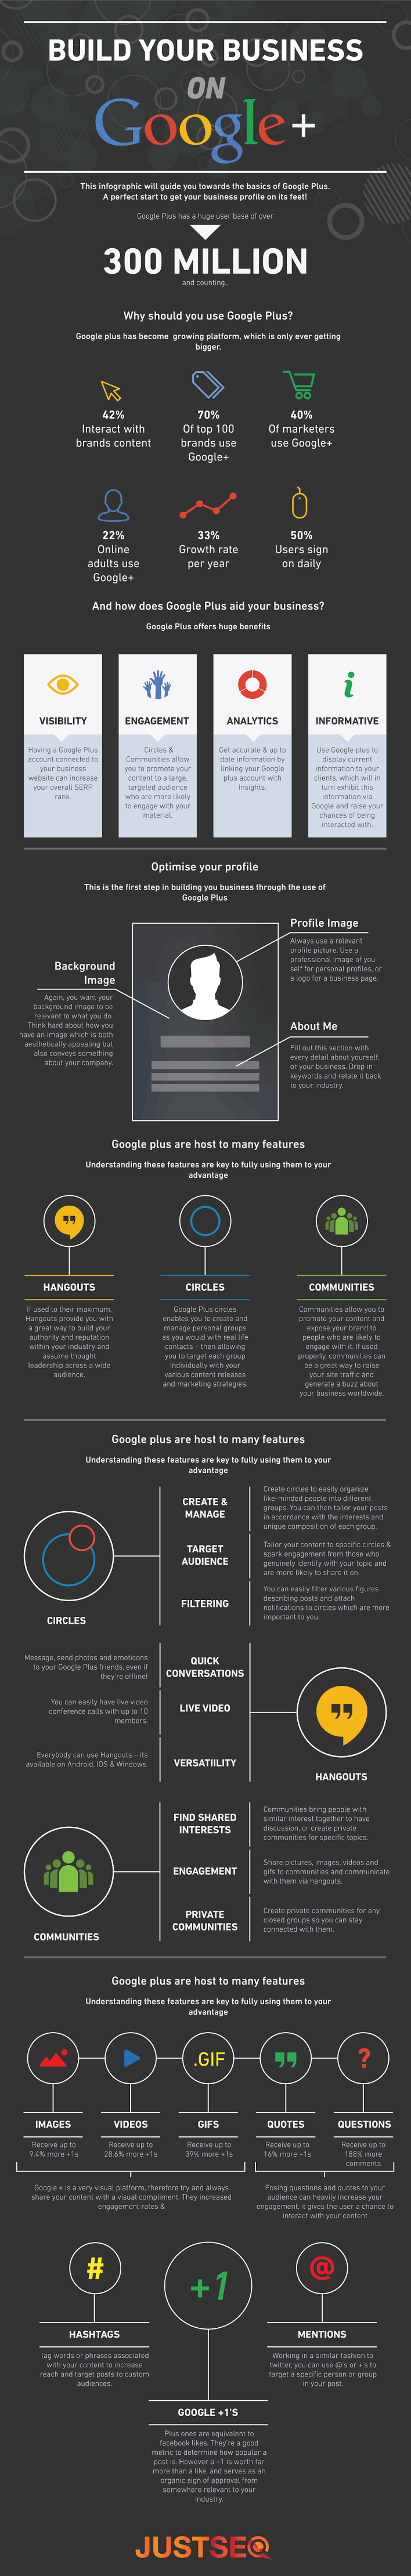 Building your business on Google+, The infographic visual guide